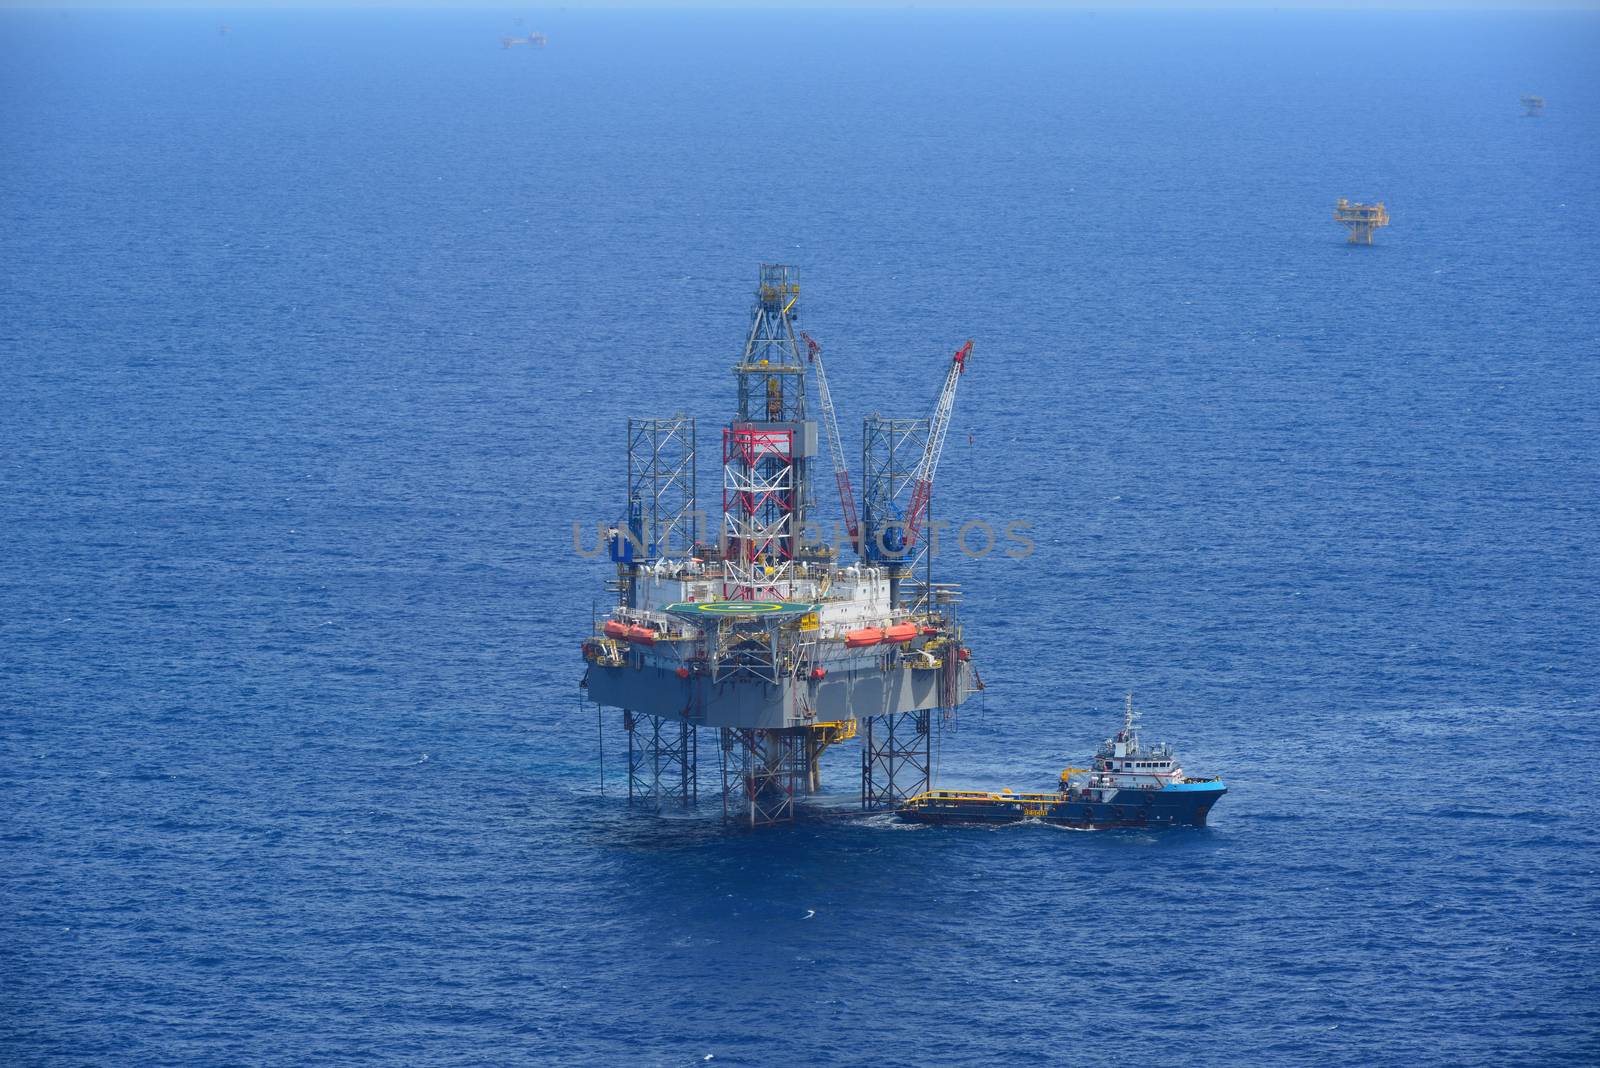 The offshore drilling oil rig and supply boat side view from aircraft.